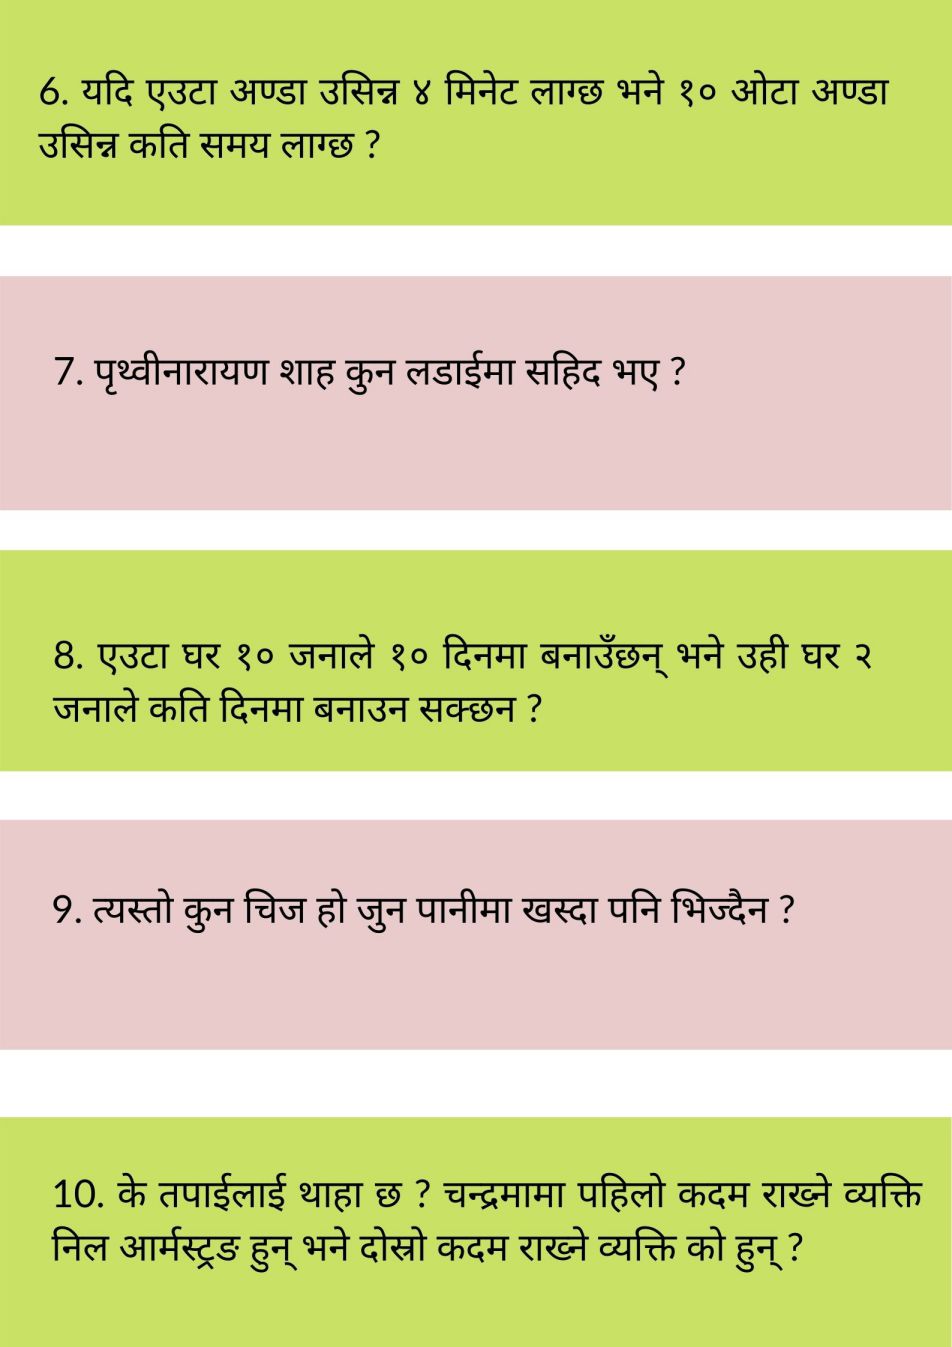 35 Nepali Tricky Questions | Dimag Khane Questions with Answers for Fun